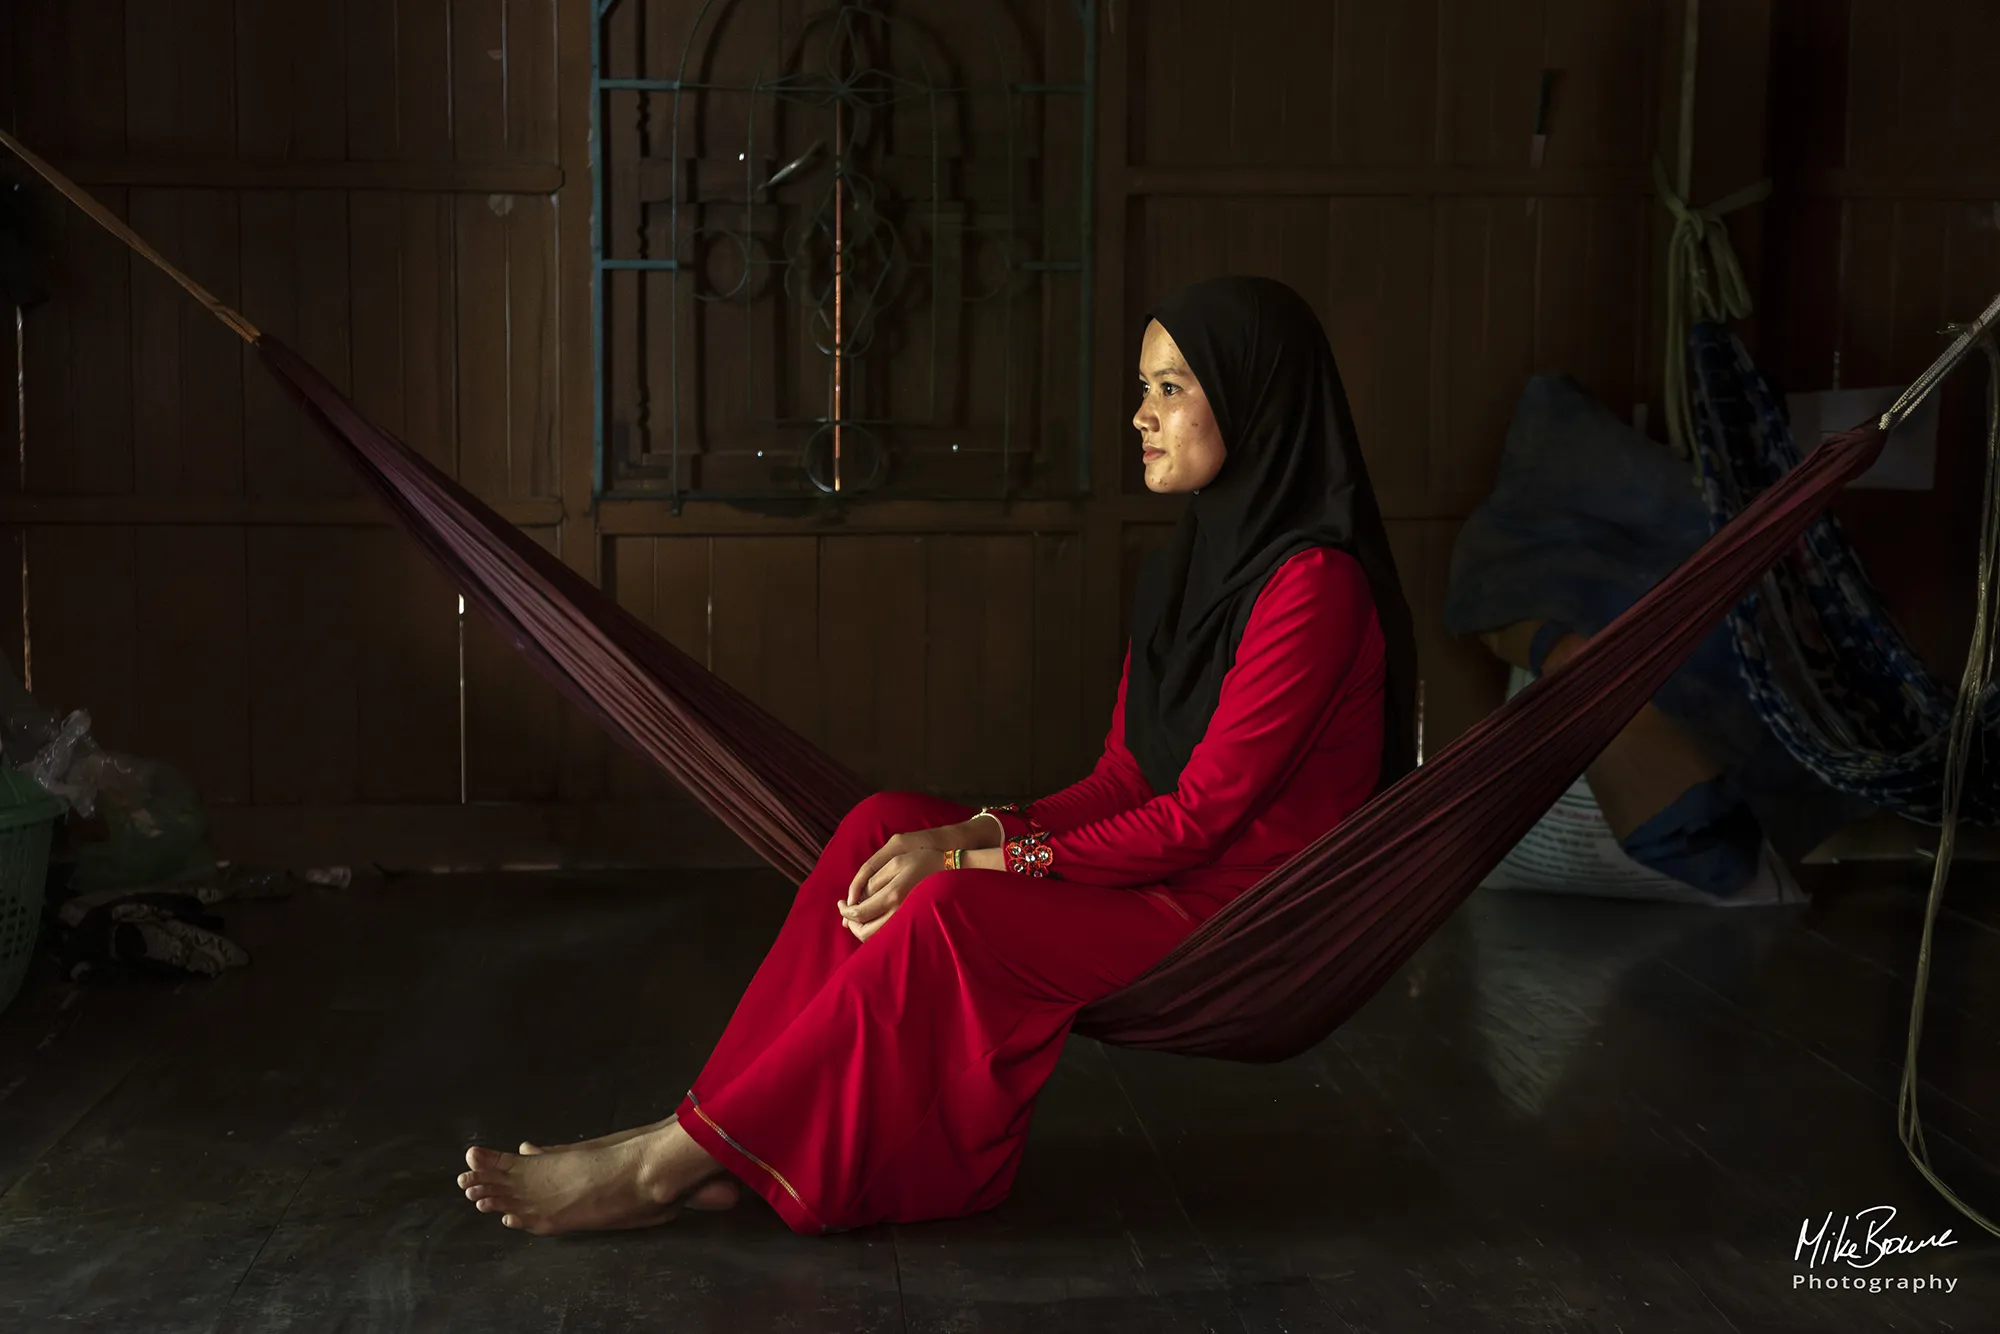 Muslim woman in red sitting on a hammock in a wooden room